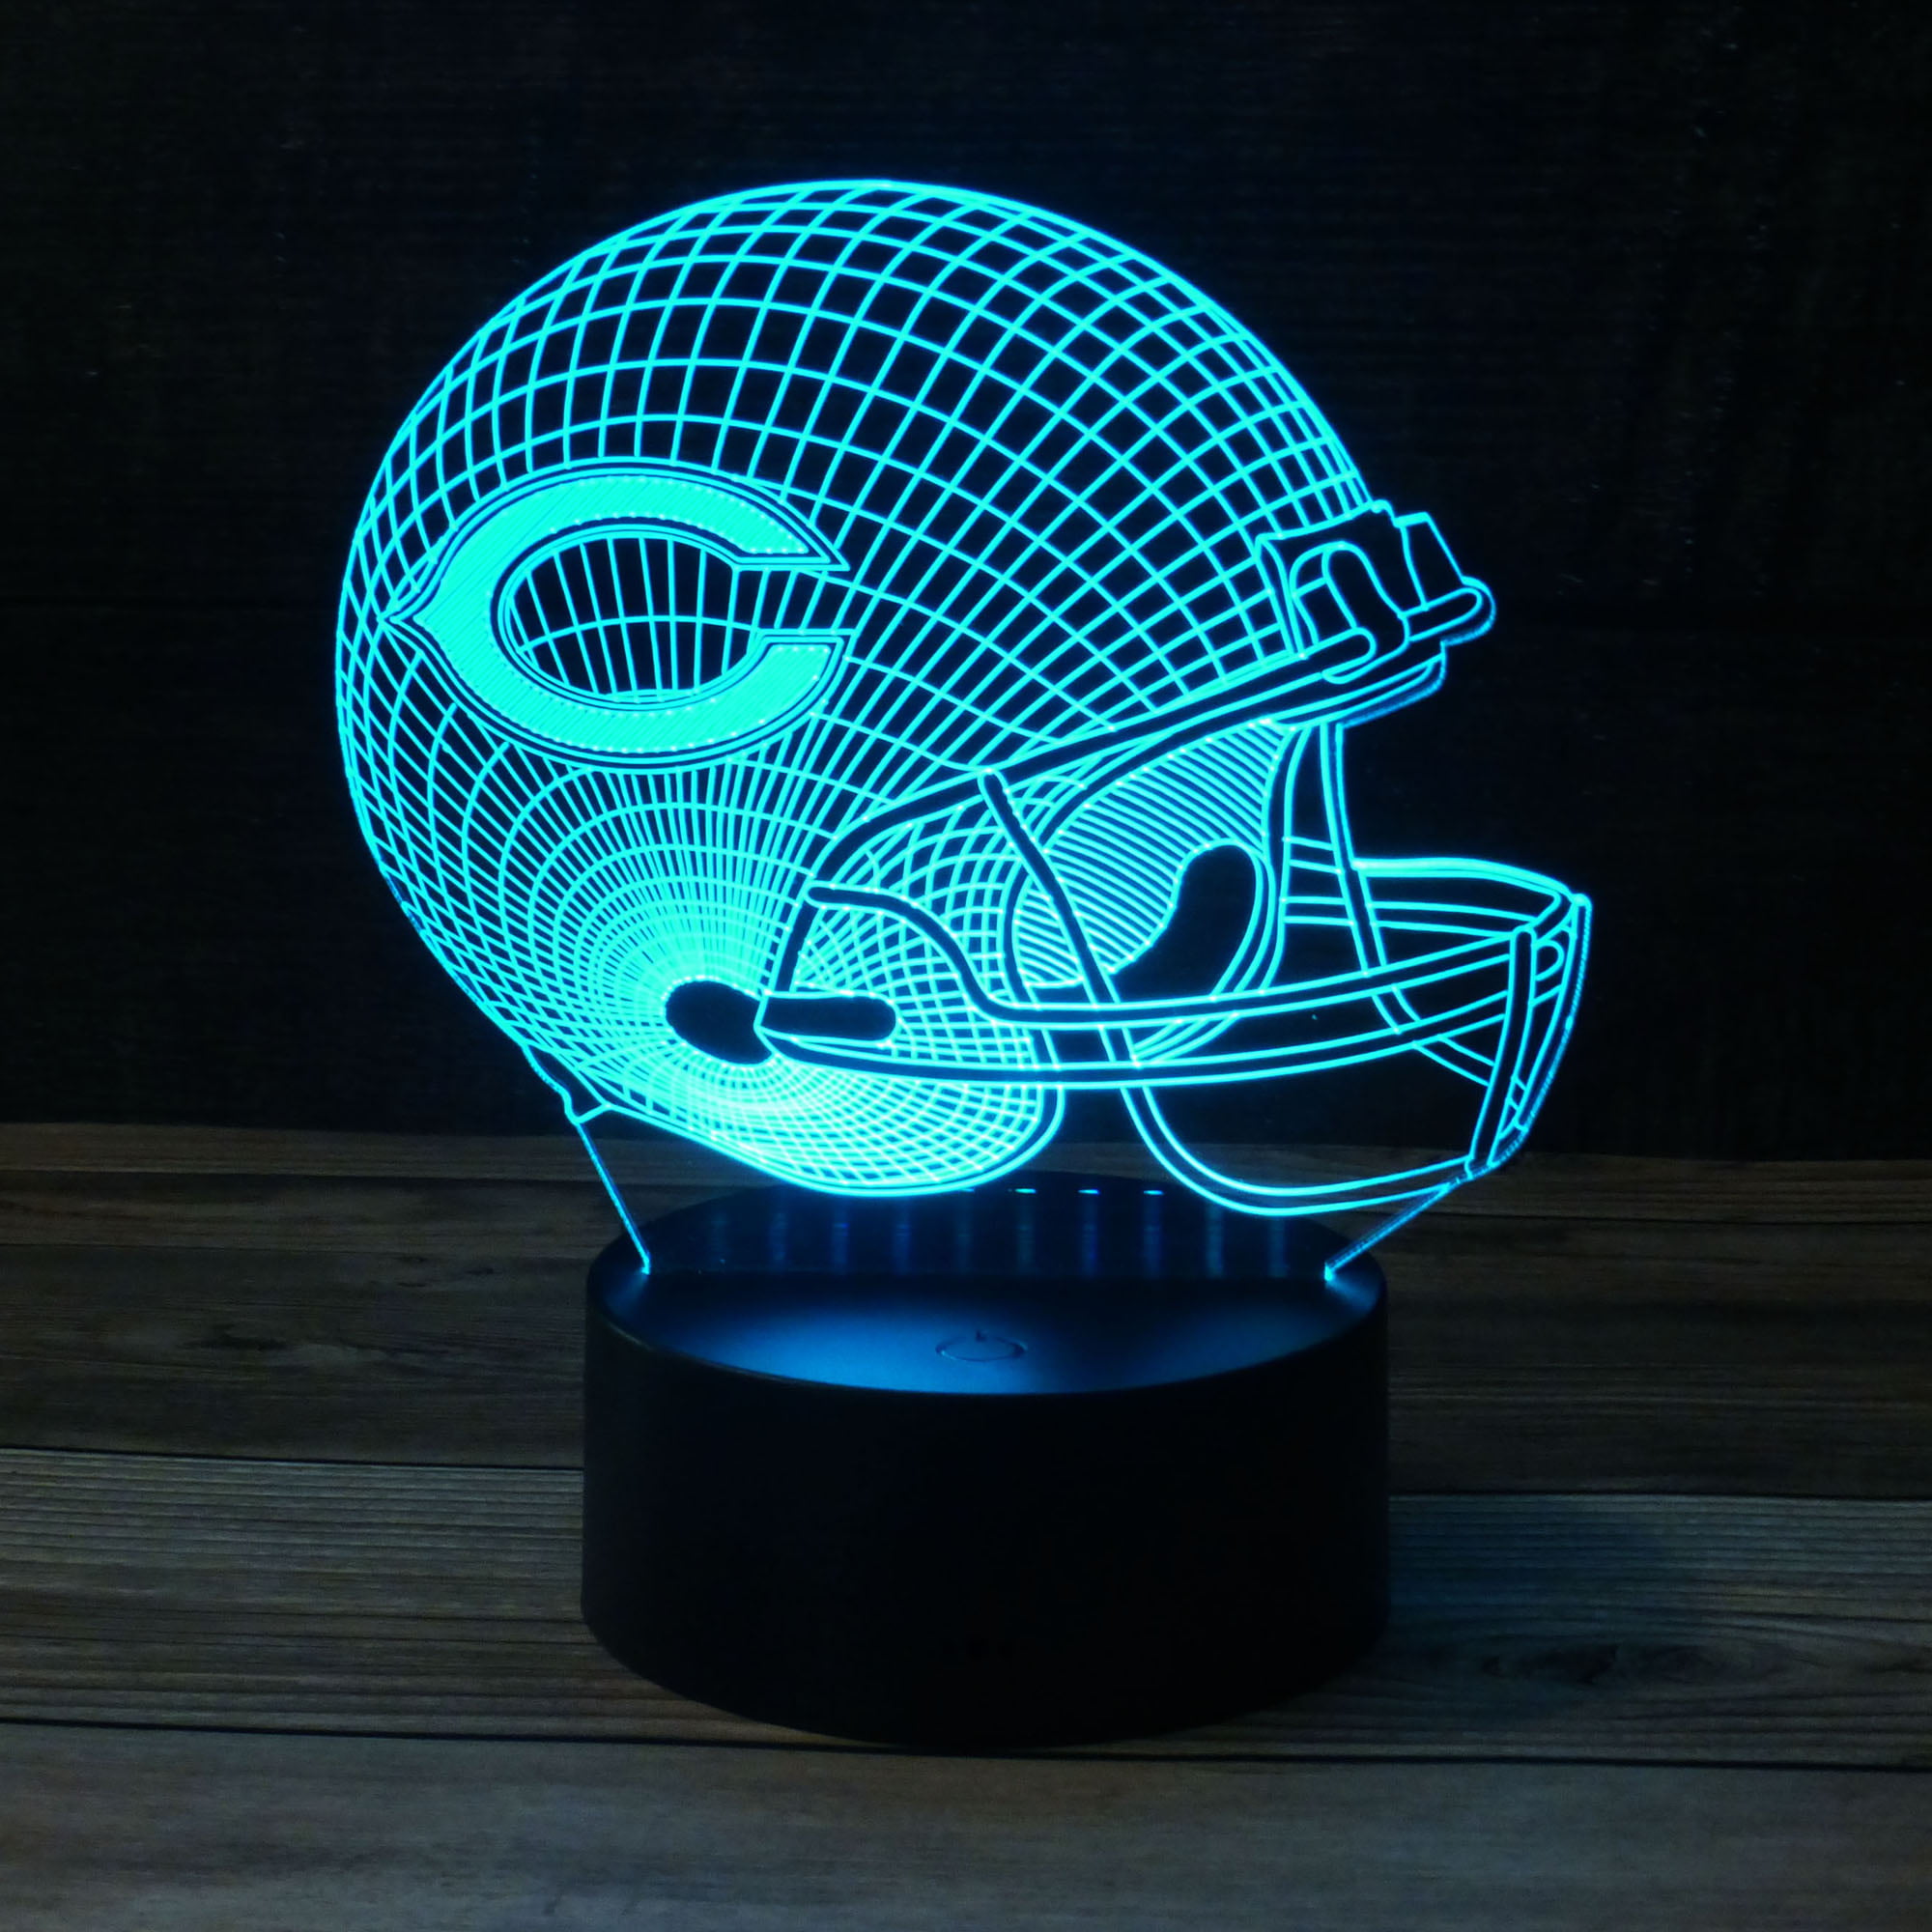 Perfect Gift for Football Sports Lovers San Francisco 49ers Touch Control Football Helmet Light- Upgraded Color Changing Touch Light Football Helmet Light Night Light for Boys Men Women 